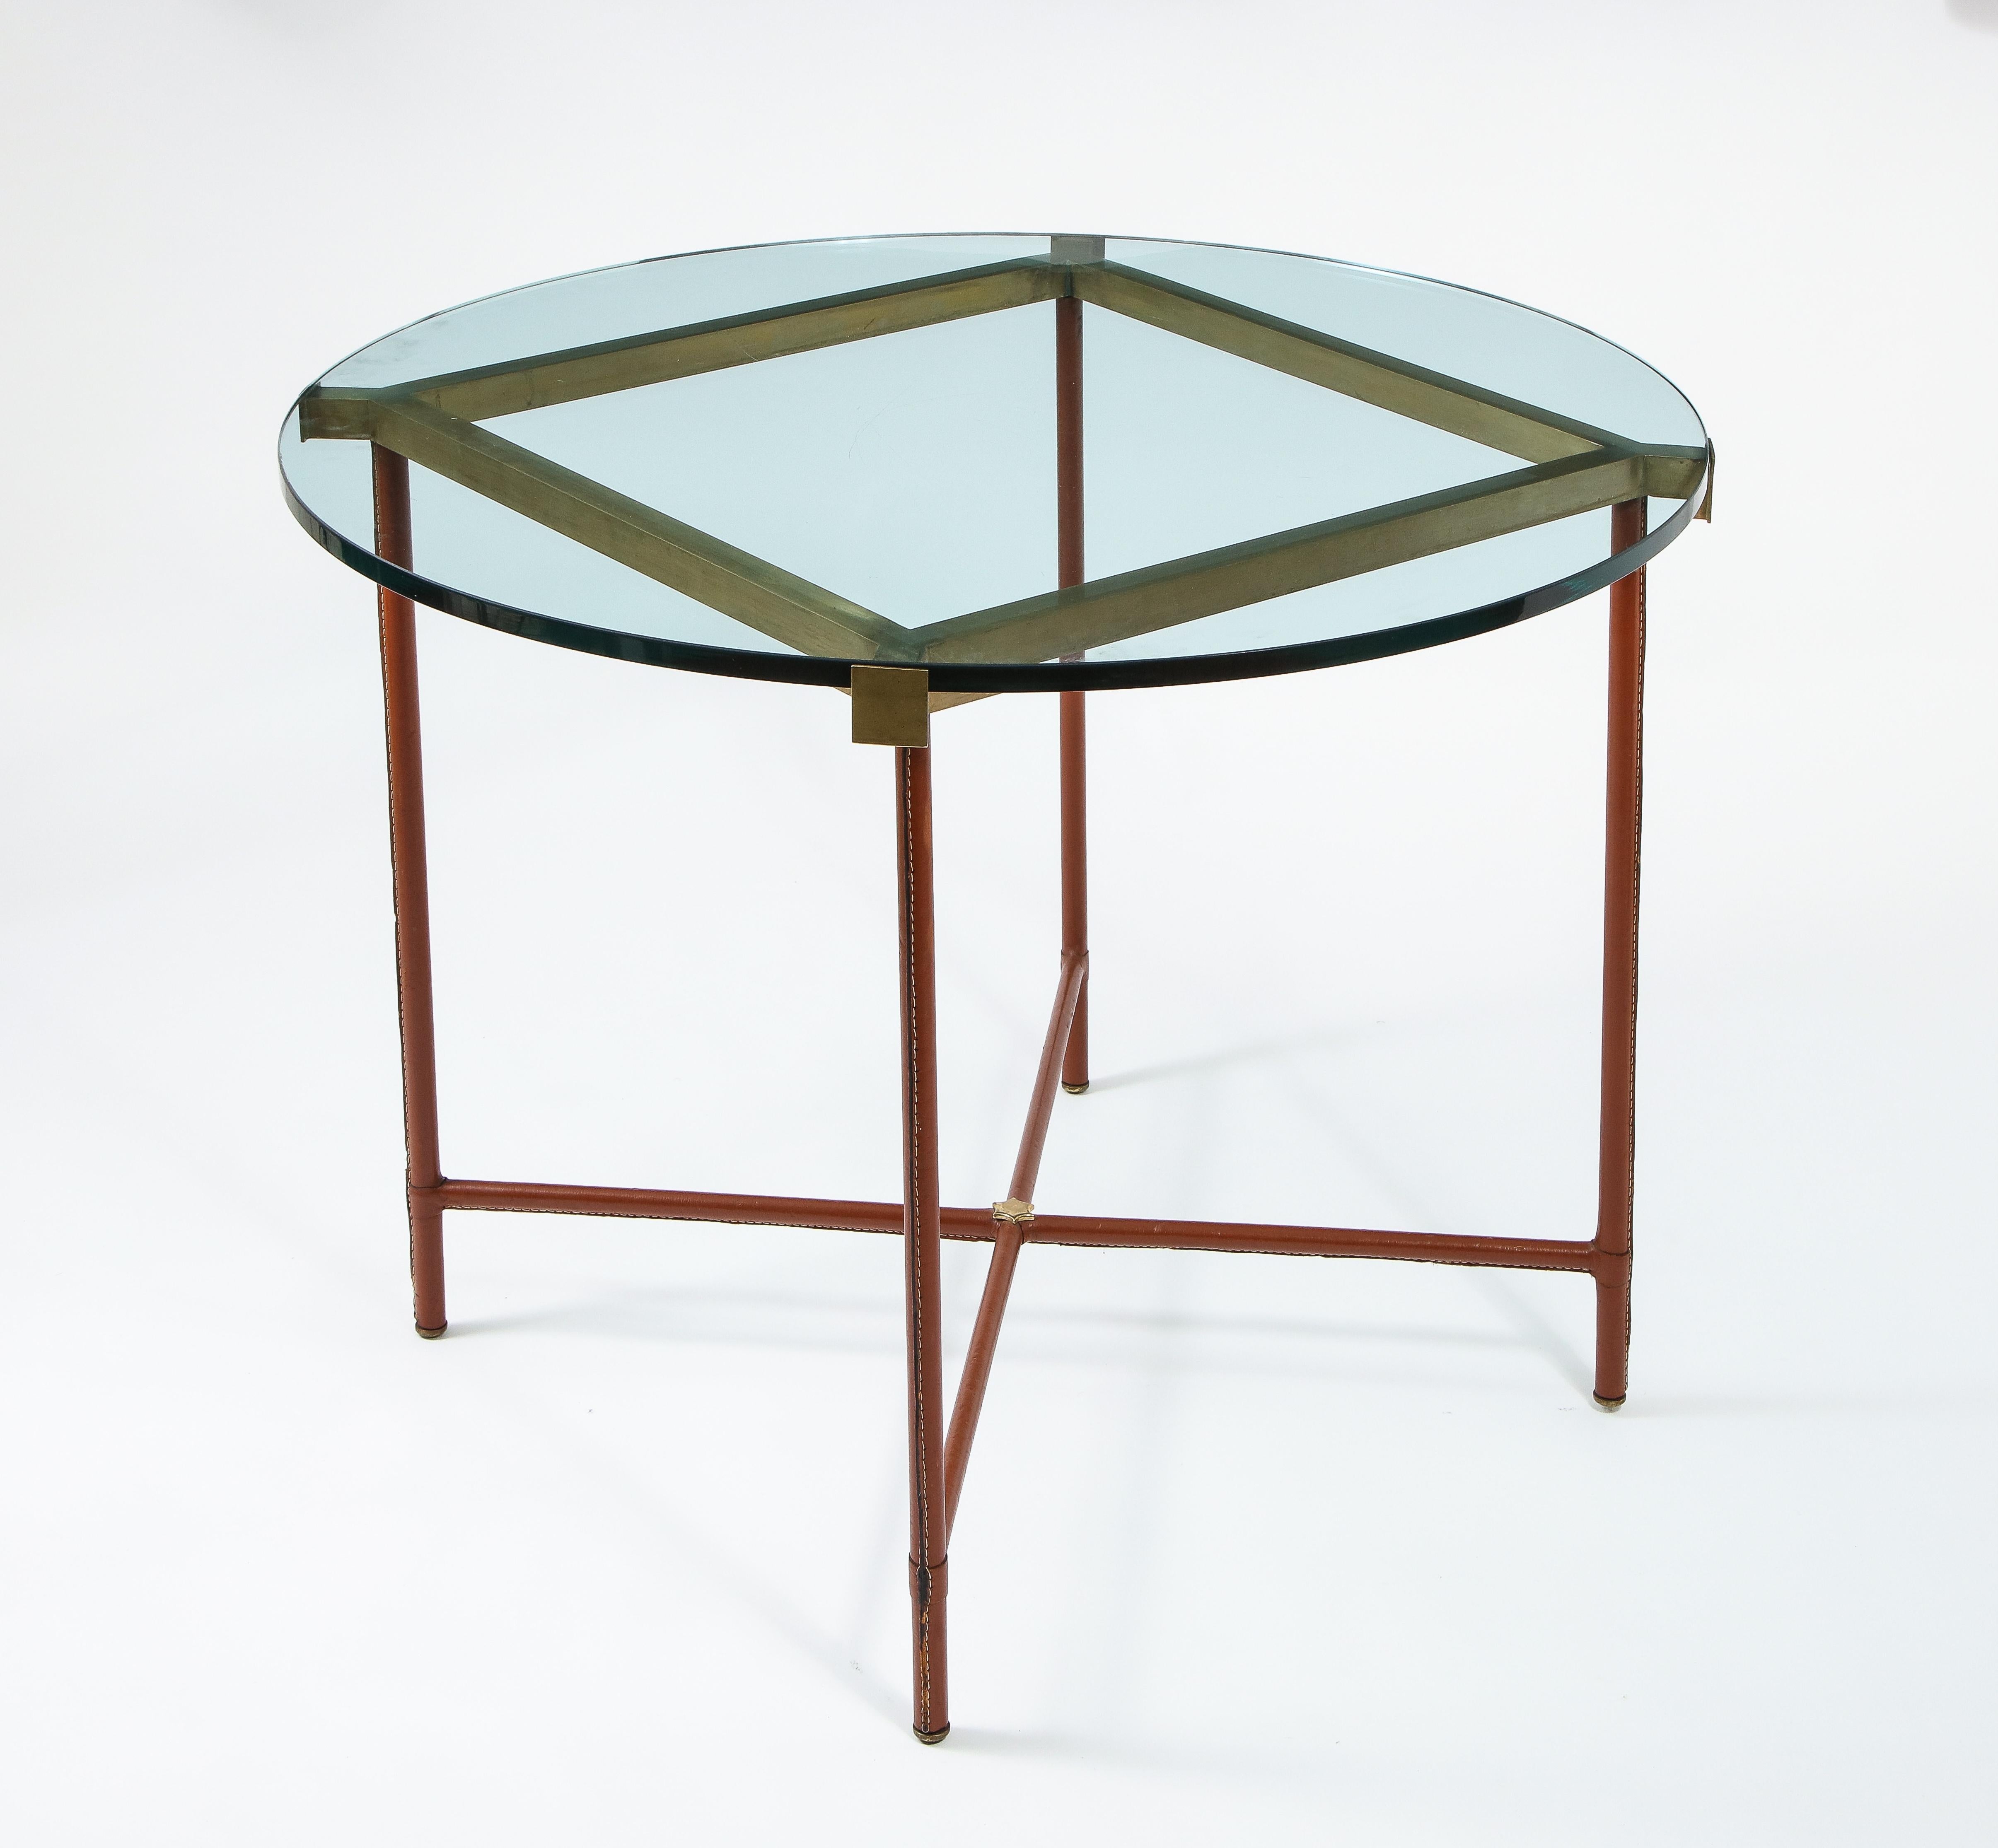 Jacques Adnet Center Table in Stitched Leather, Bronze and Gllass, France, 1950s For Sale 2